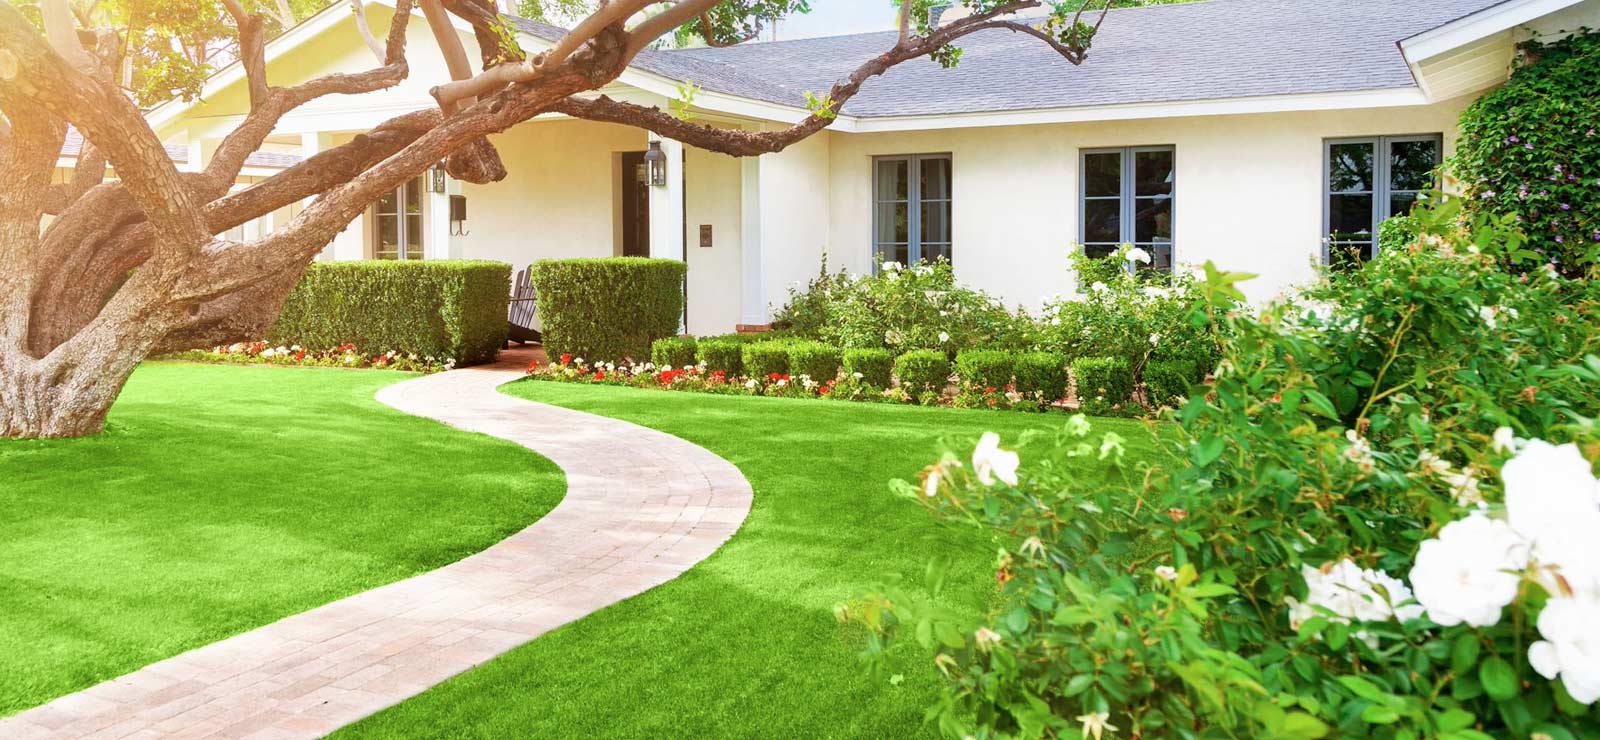 A picture of a house with a nice lawn and garden with walking path